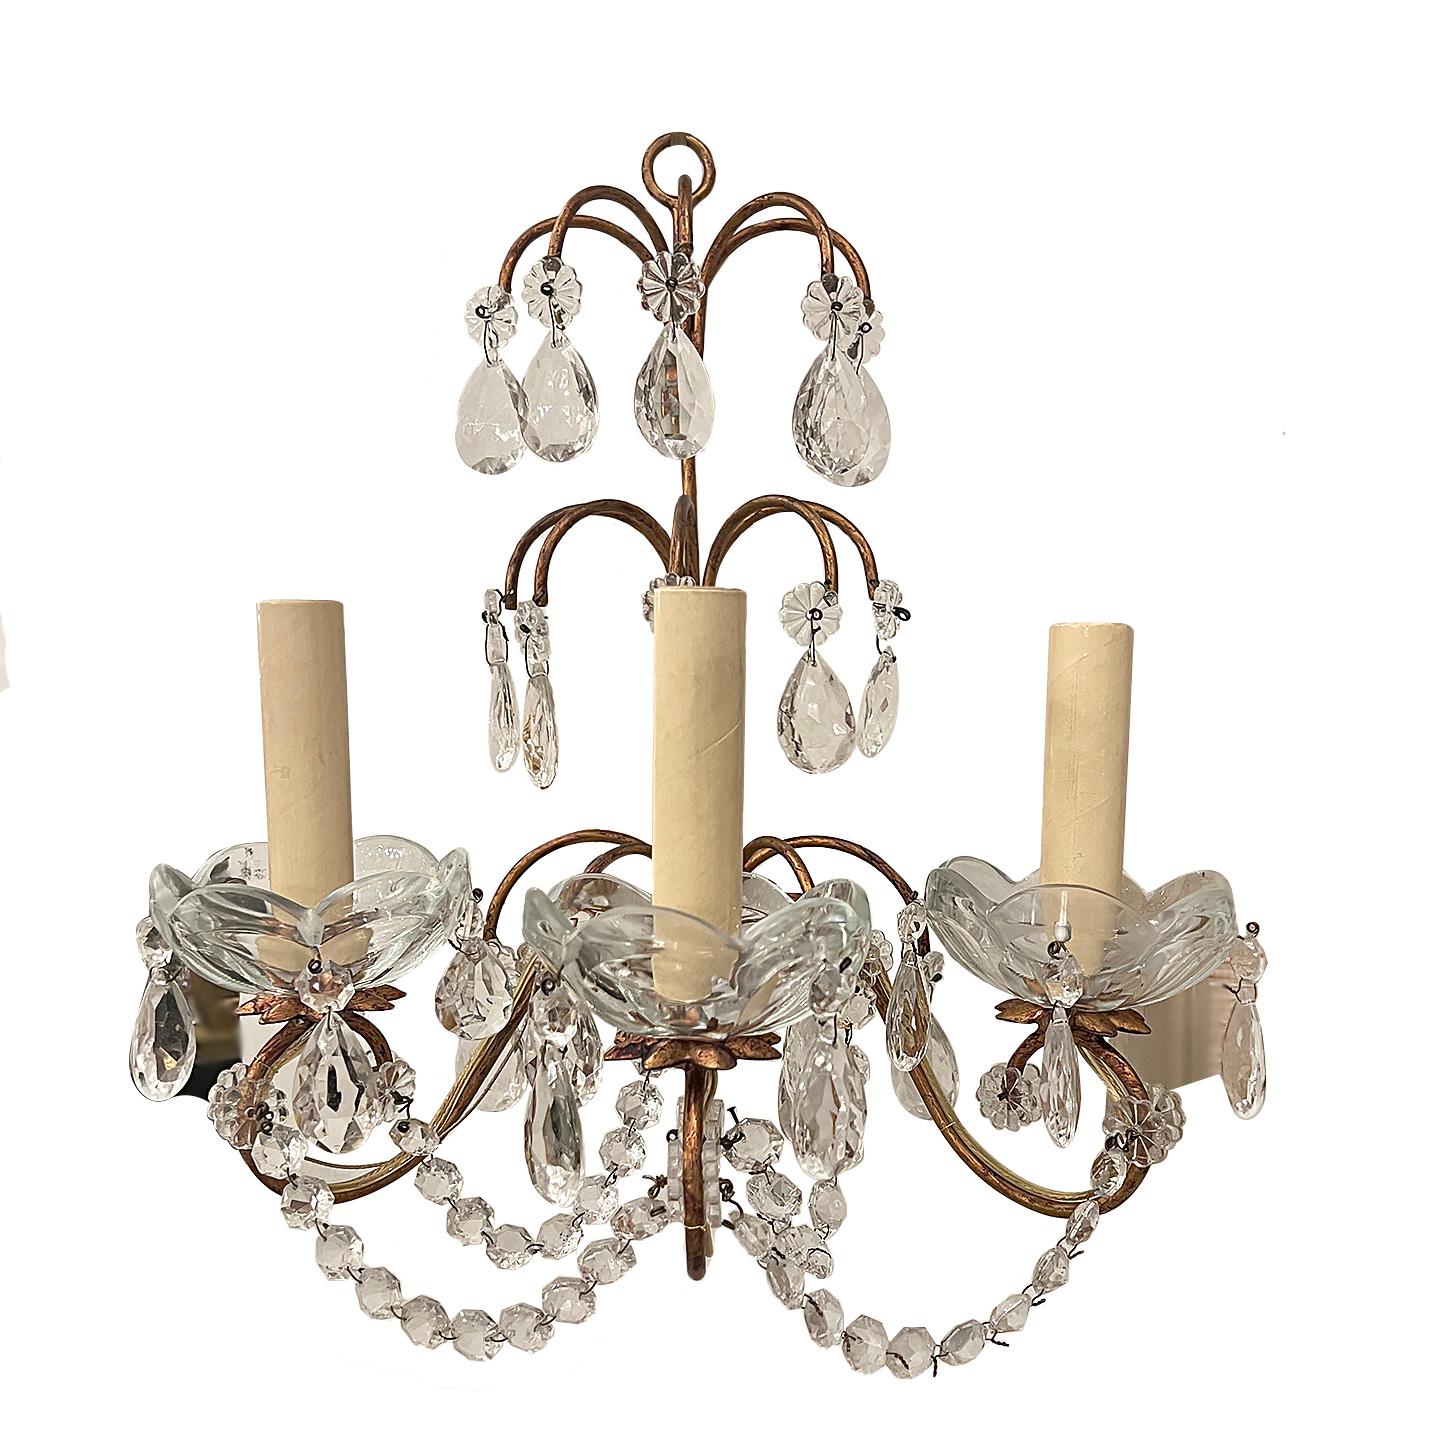 Set of eight gilt metal three-arm sconces with crystal drops and pendants, with original patina.

Measurements:
Height: 17